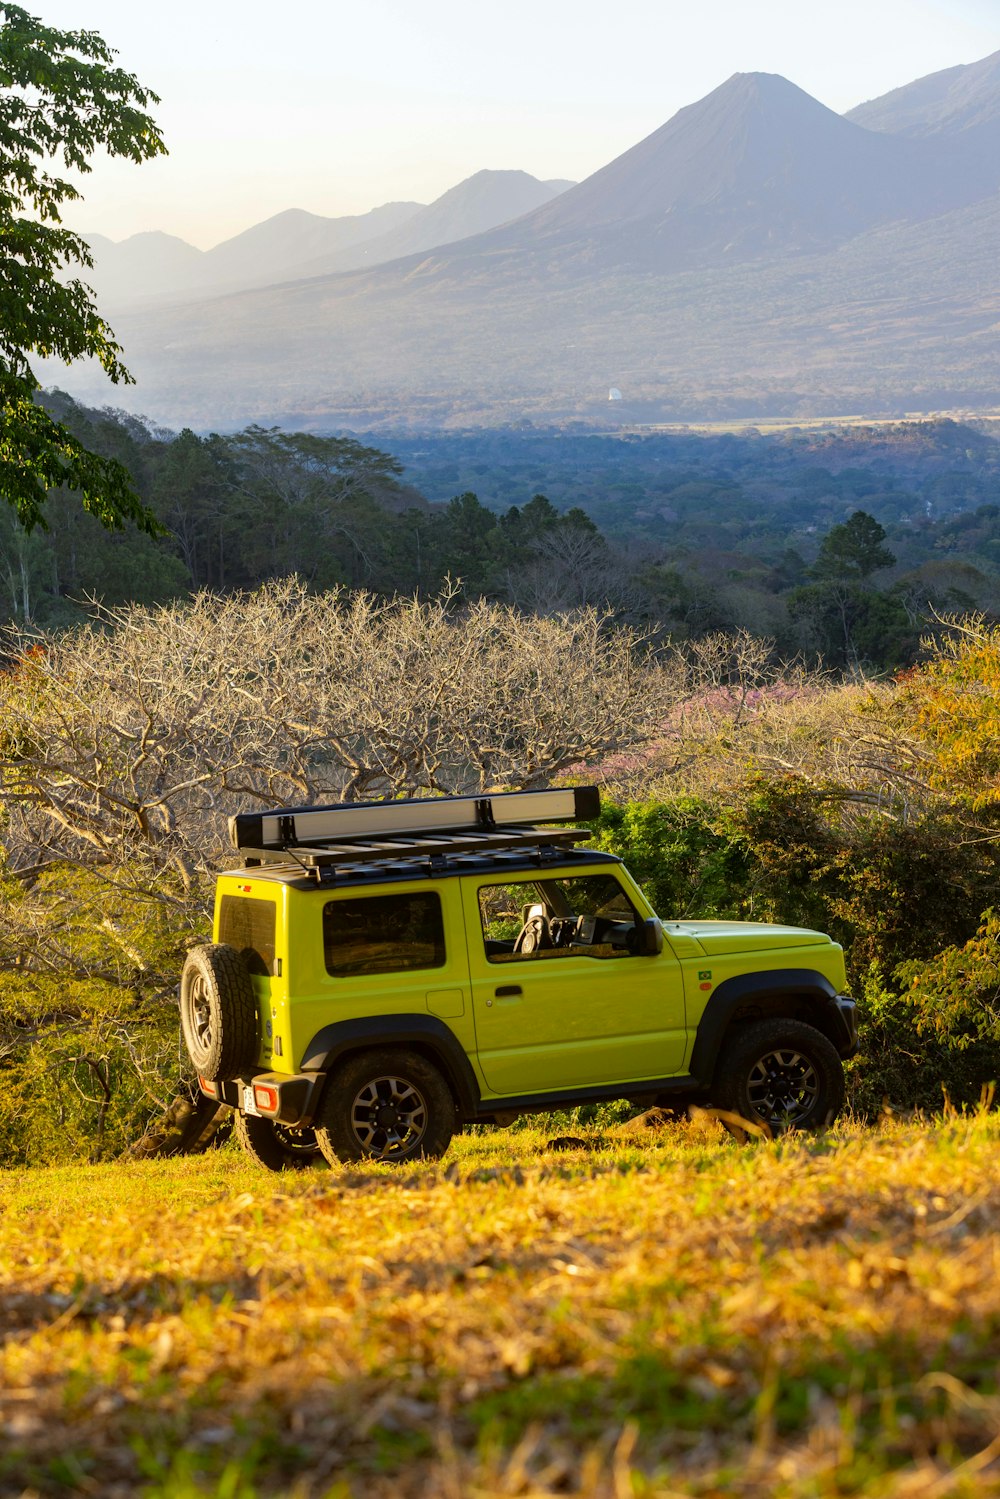 a yellow jeep parked in a field with mountains in the background